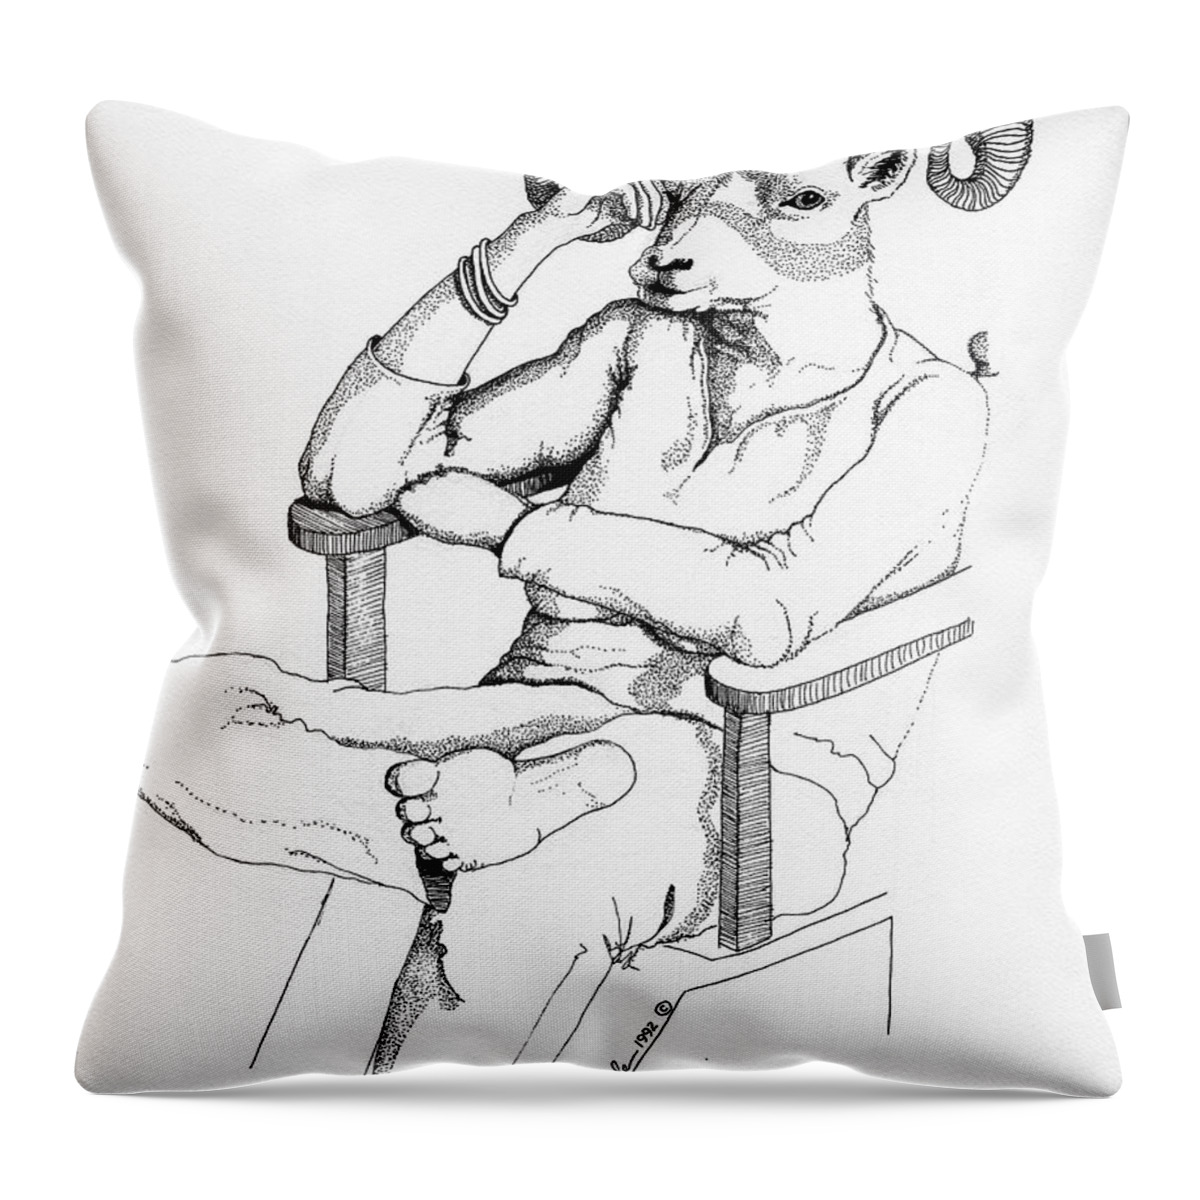 Anthropomorphic Throw Pillow featuring the drawing Raminiscing by Linda Apple